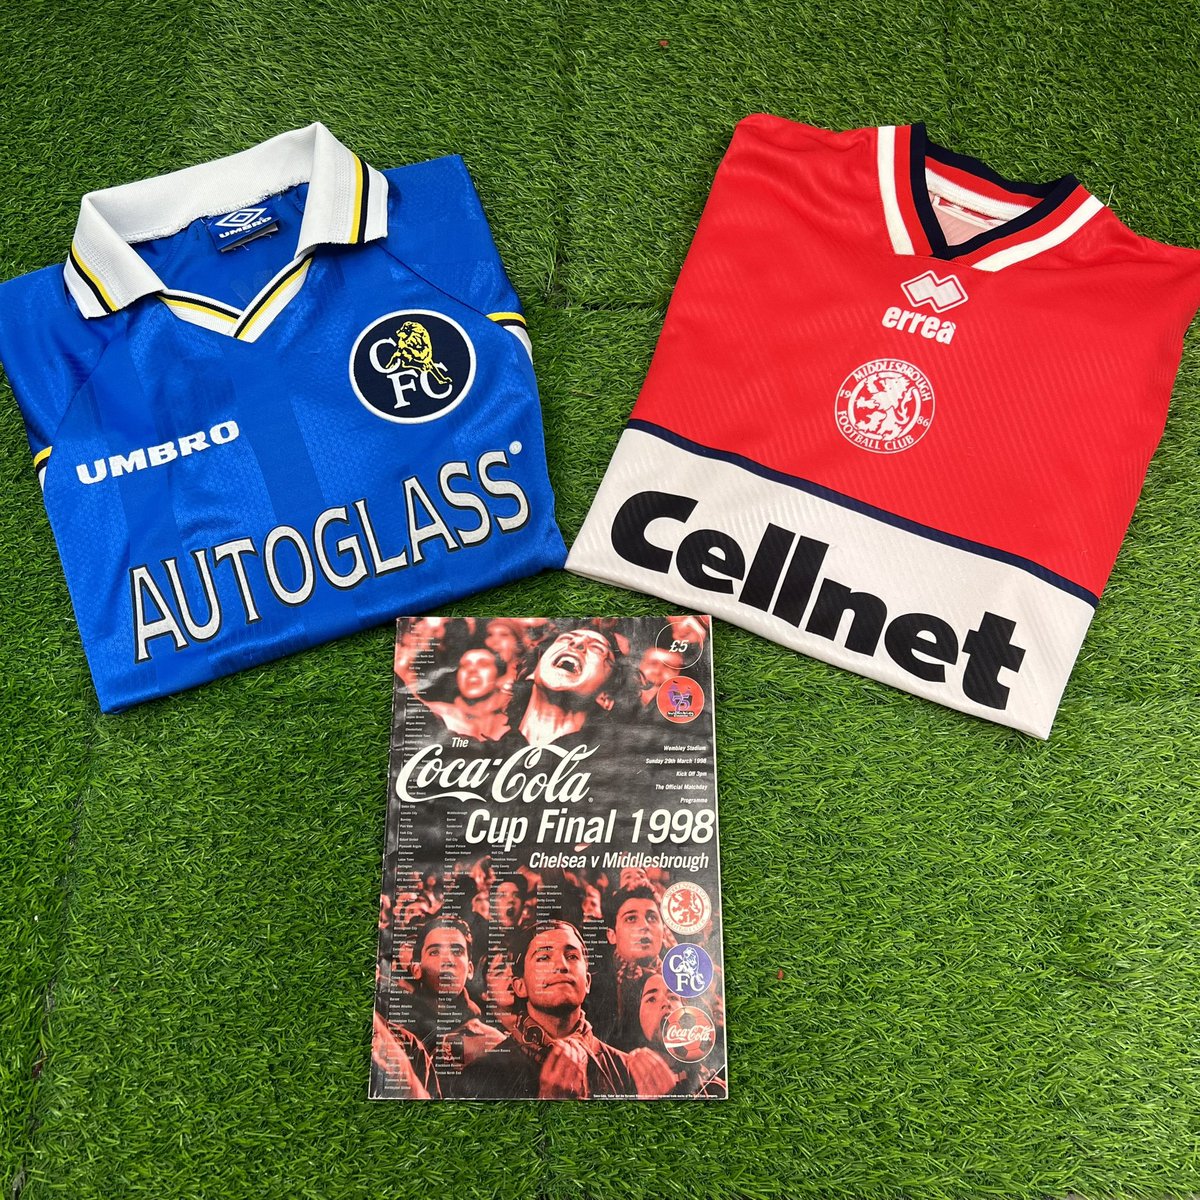 The @CocaCola_GB Cup Final 1998 @ChelseaFC 2-0 @Boro 👇

#cocacola #cocacolacup #chelseafc #middlesbroughfc #wembleystadium #boro #historicfootballshirts